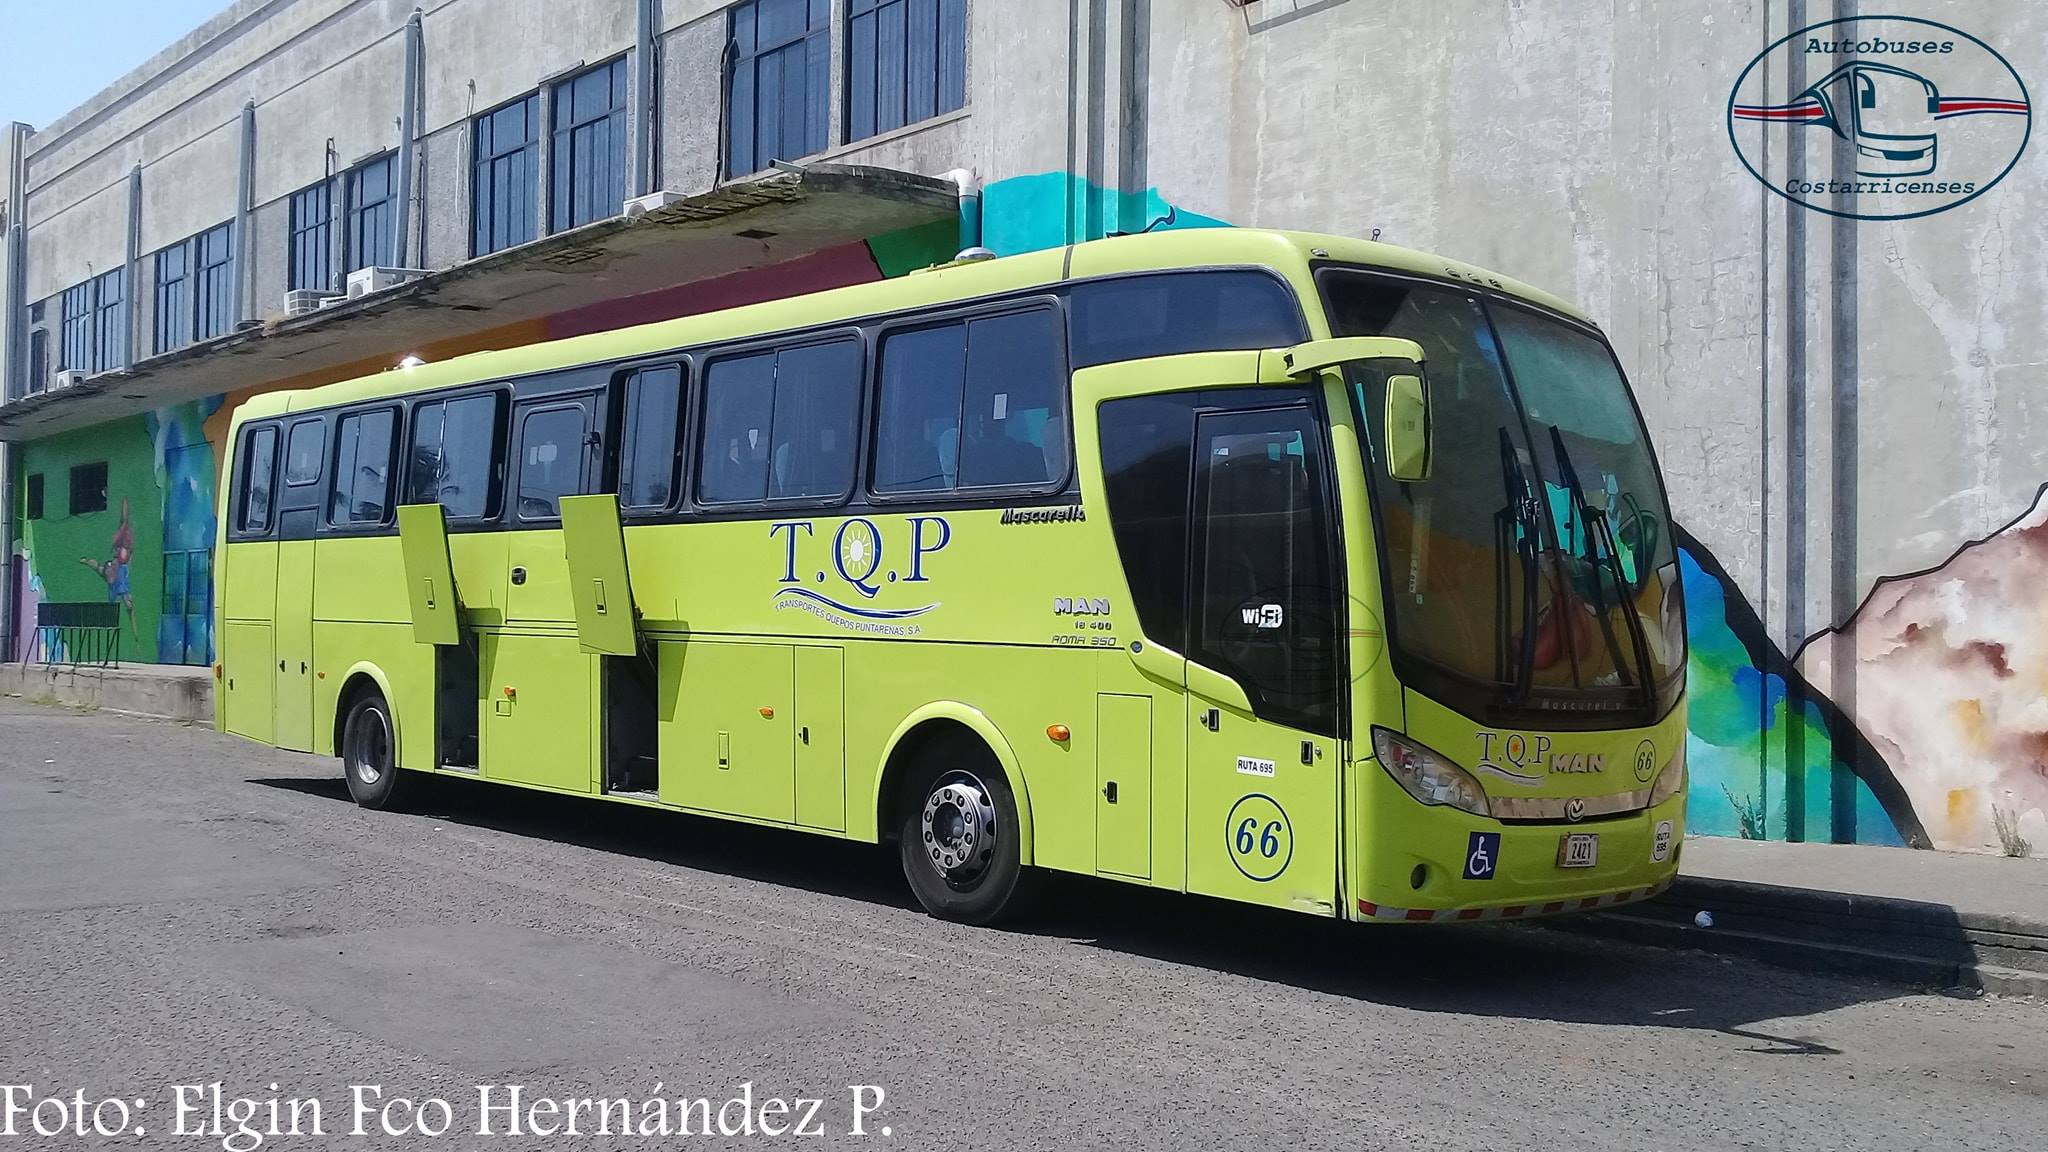 How To Get From Manuel Antonio To Santa Teresa Beach - All Possible Ways, cheapest way from Manuel Antonio to Santa Teresa, Manuel Antonio to Santa Teresa, Manuel Antonio to Santa Teresa bus, Manuel Antonio to Puntarenas bus, Quepos to Puntarenas bus, Manuel Antonio to Quepos bus, Quepos to Manuel Antonio, Ferry schedule Puntarenas to Paquera, Paquera to Cobano, Cobano to Santa Teresa